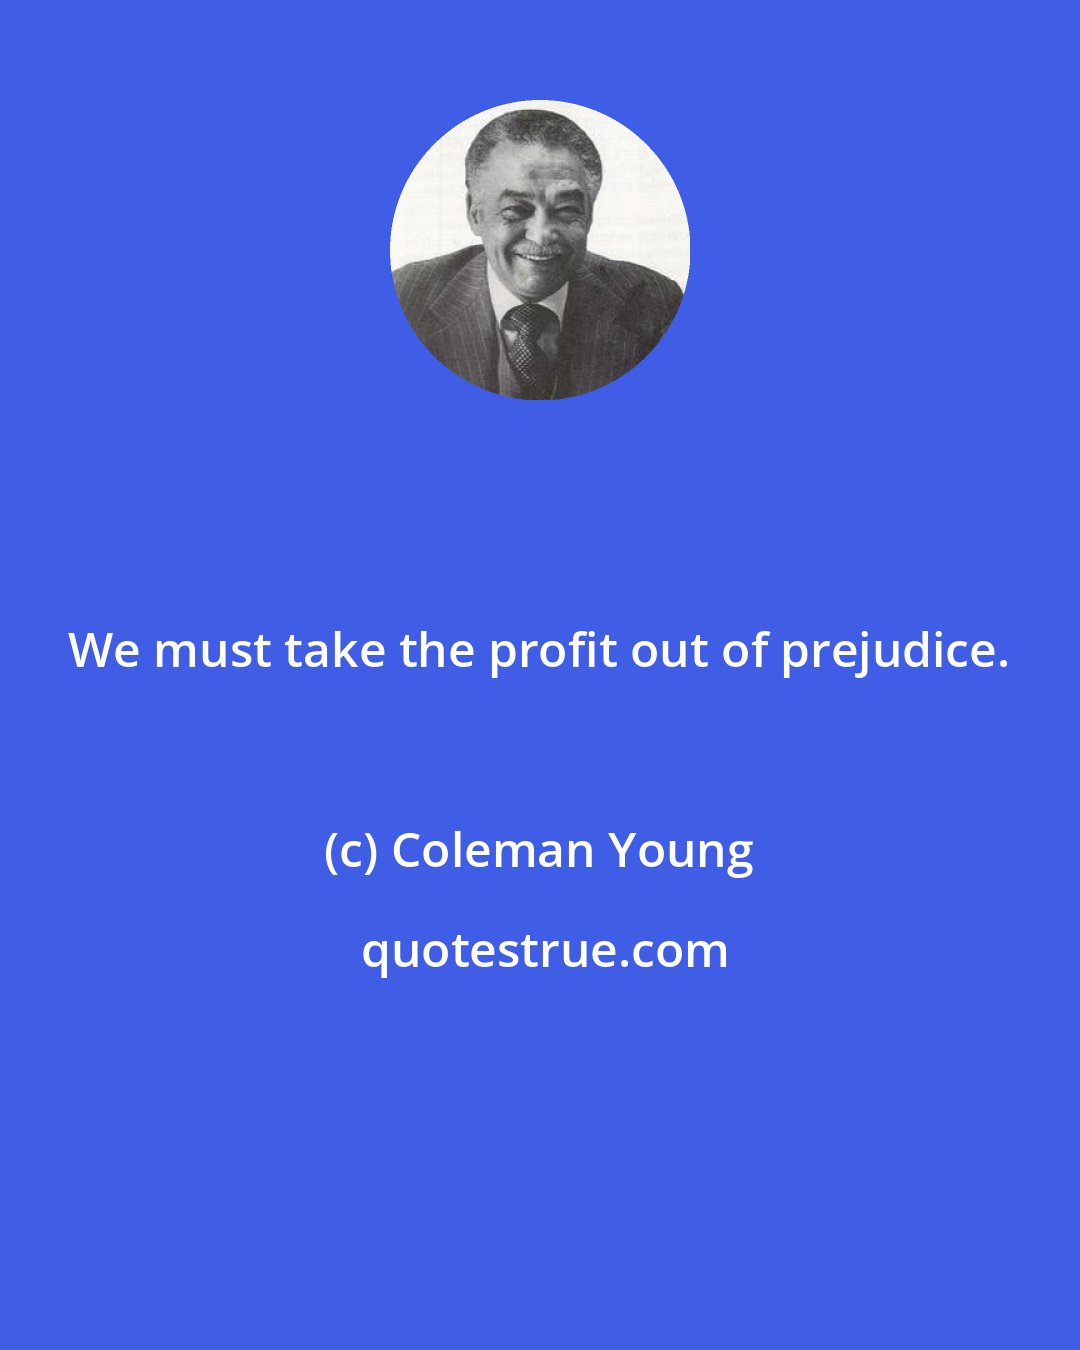 Coleman Young: We must take the profit out of prejudice.